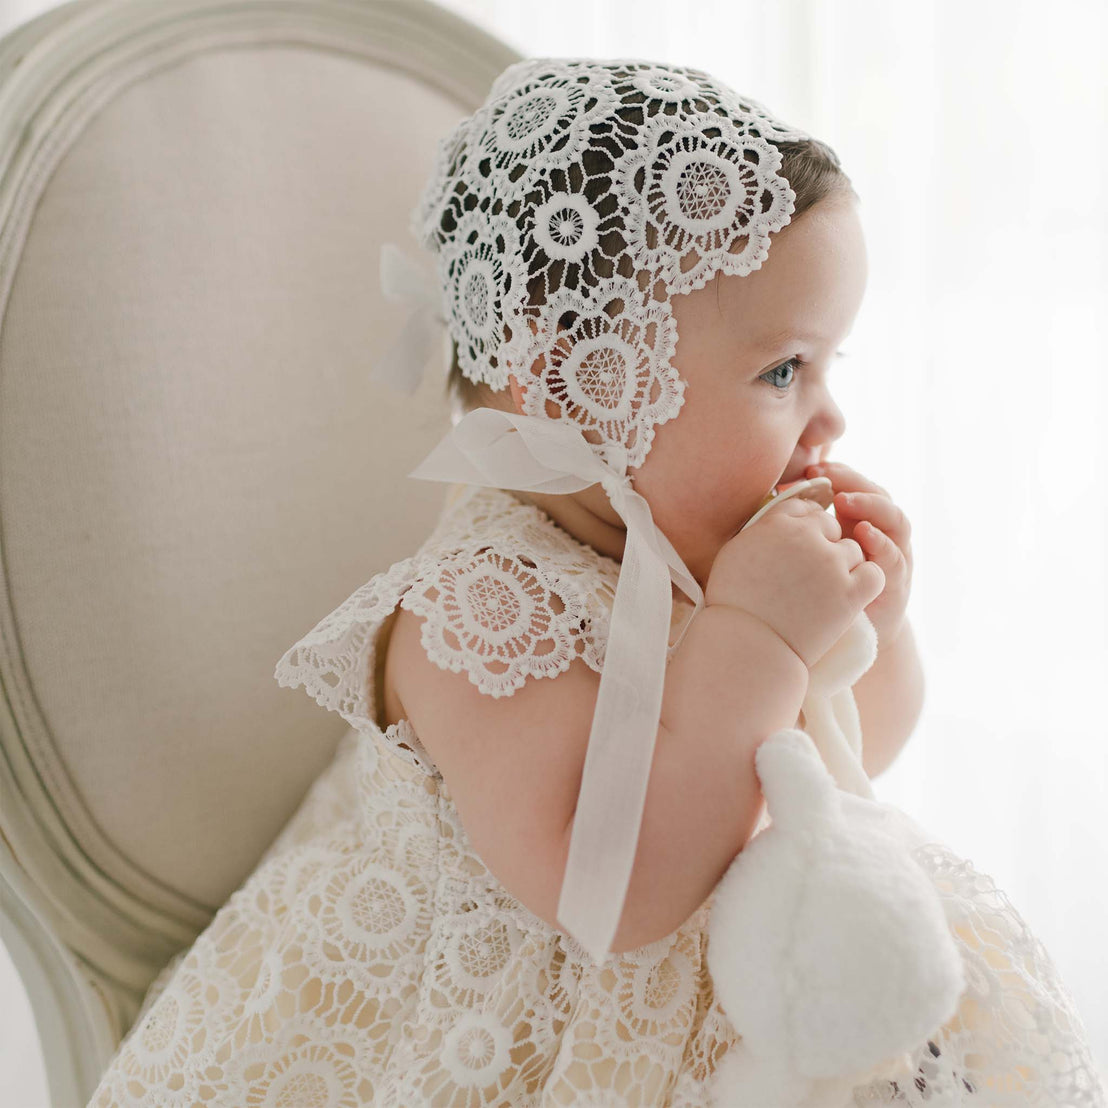 A baby sits on a chair wearing a white lace Poppy Blessing Dress & Bonnet. The baby is facing sideways, holding a white stuffed animal, and putting something in their mouth. The background is bright and softly lit.